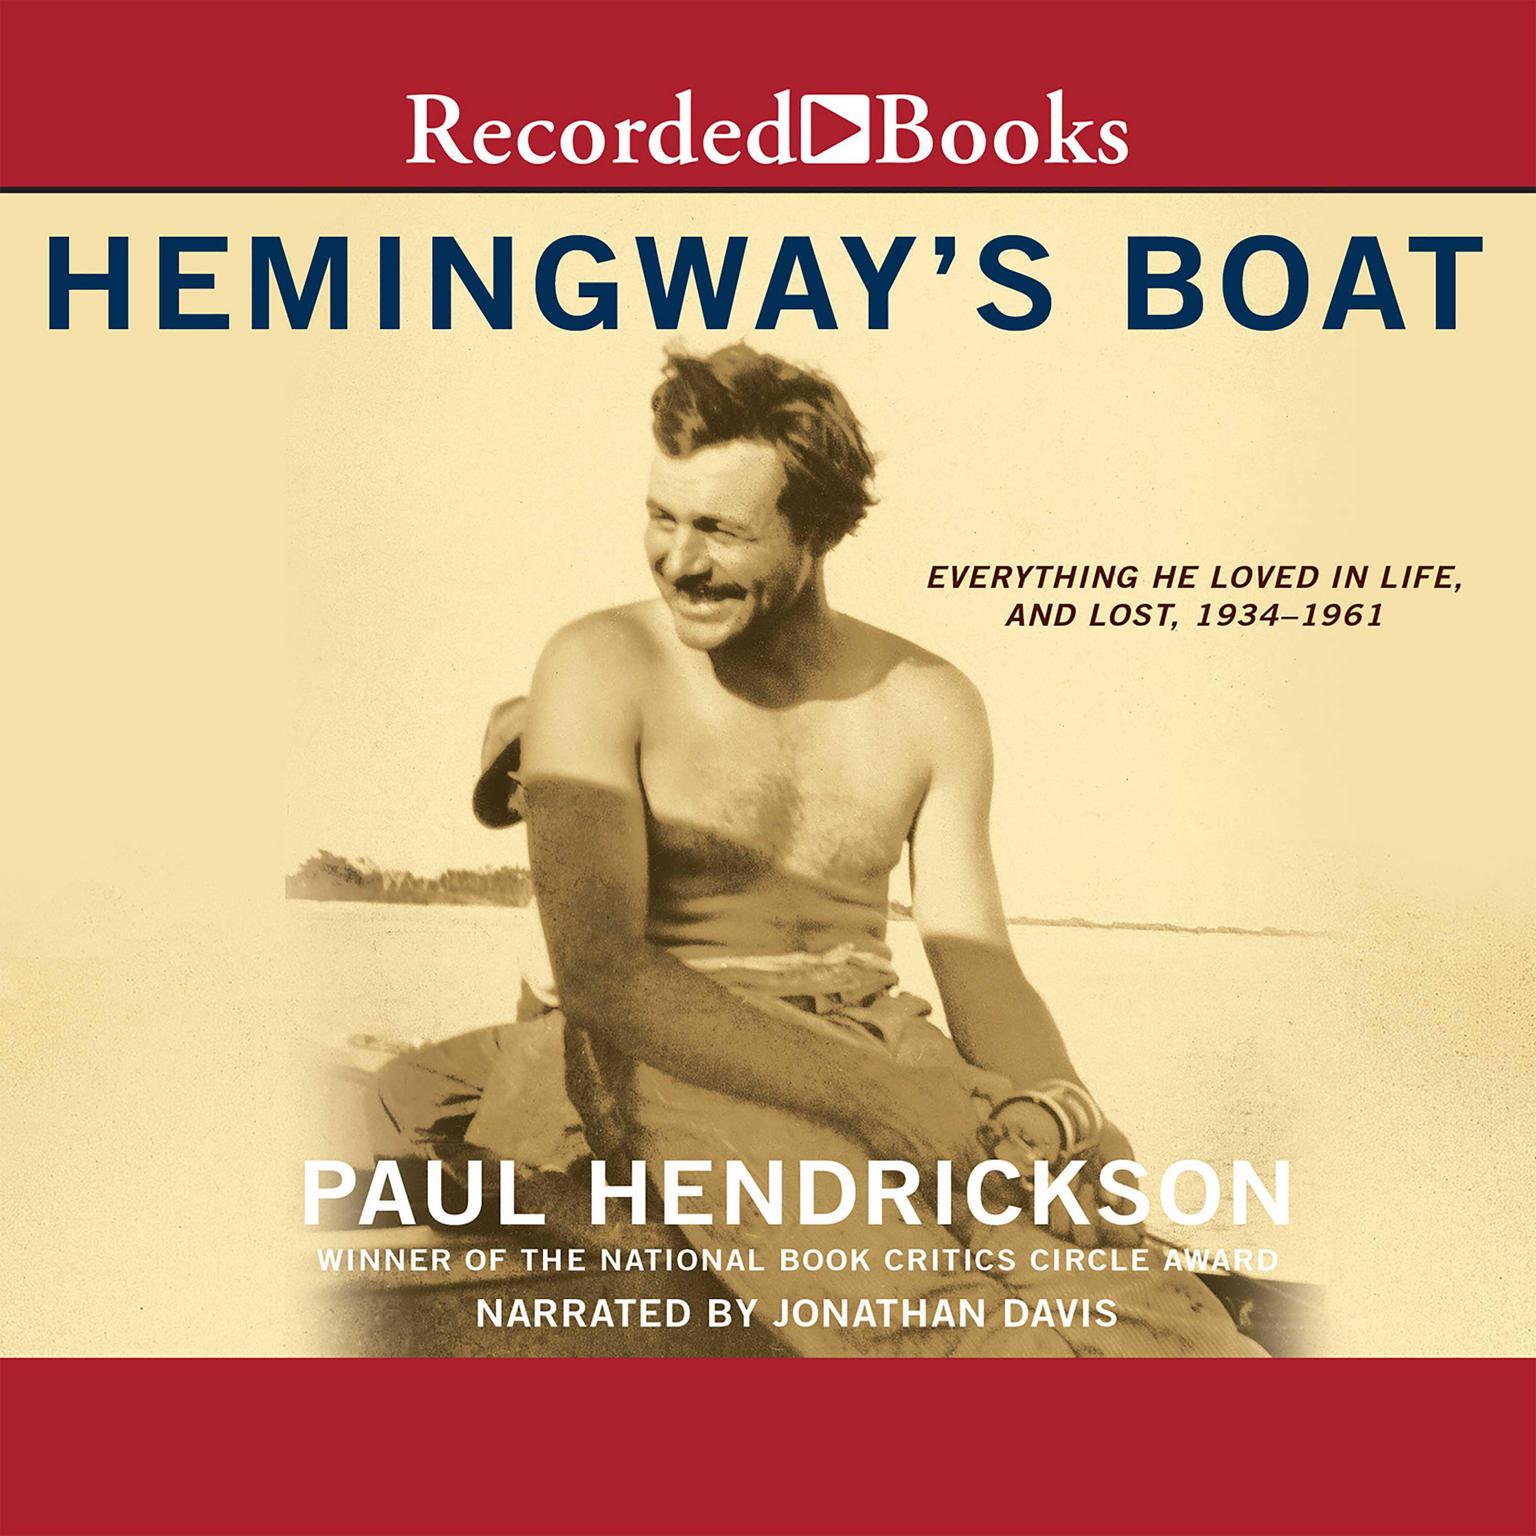 Hemingways Boat: Everything He Loved in Life, and Lost, 1934-1961 Audiobook, by Paul Hendrickson